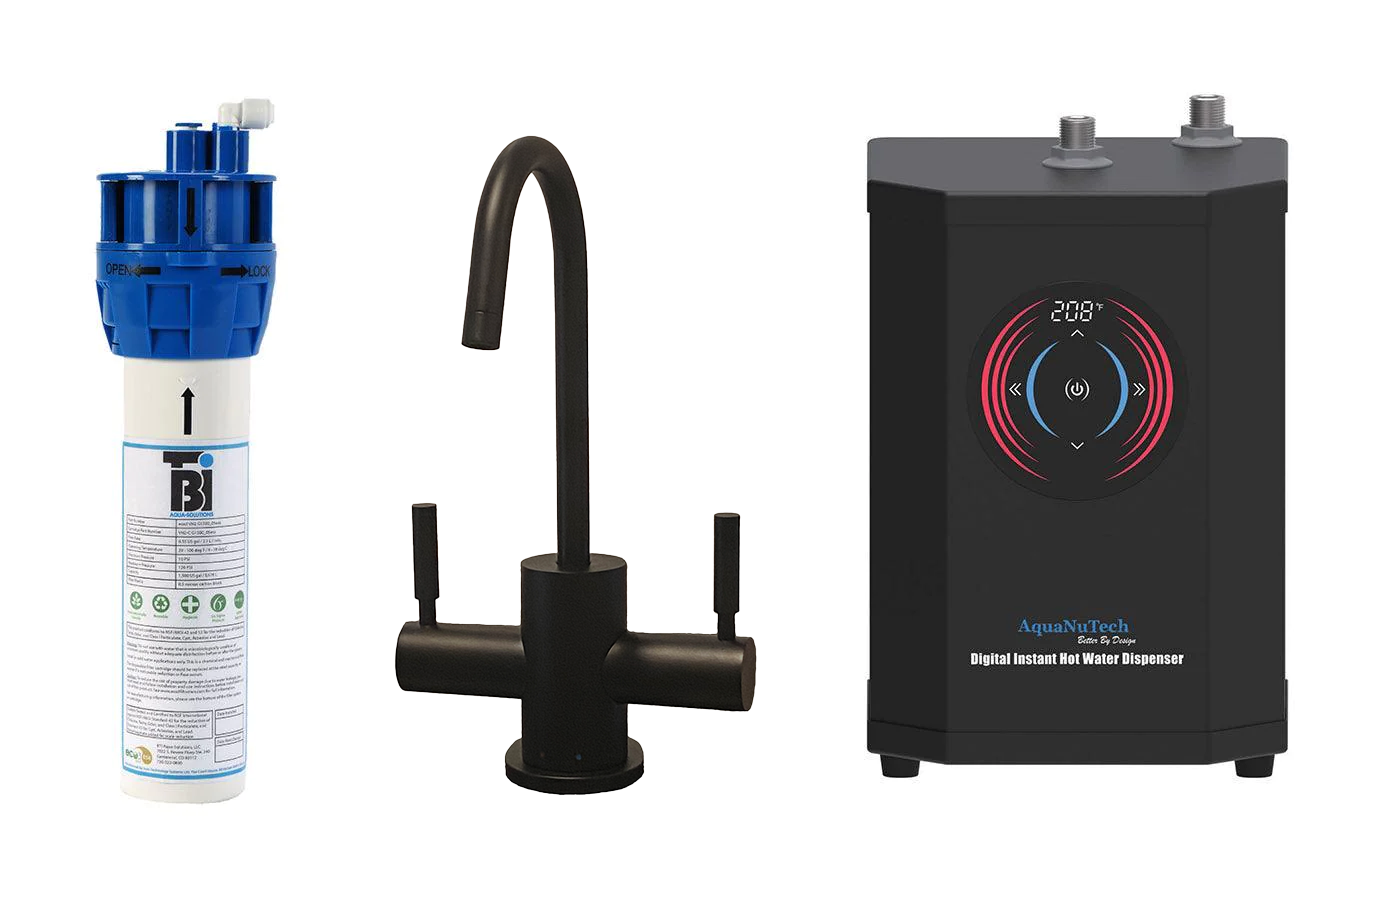 Filtration/Hot Water Combo - Contemporary C-Spout Faucet With Digital Instant Hot Water Dispenser and Filtration System